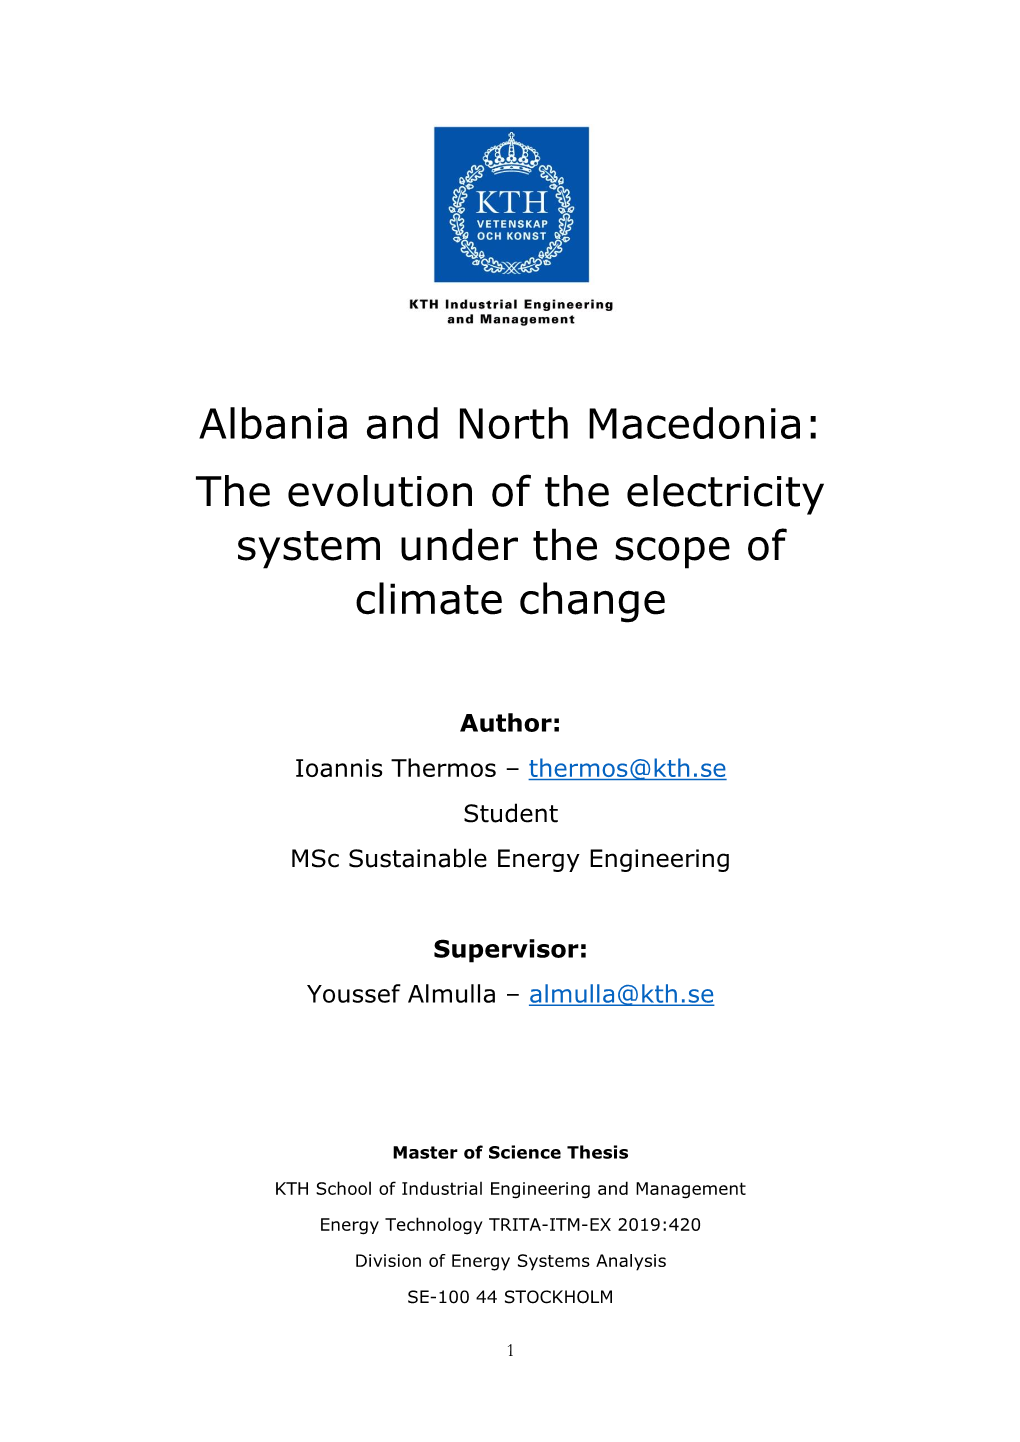 Albania and North Macedonia: the Evolution of the Electricity System Under the Scope of Climate Change